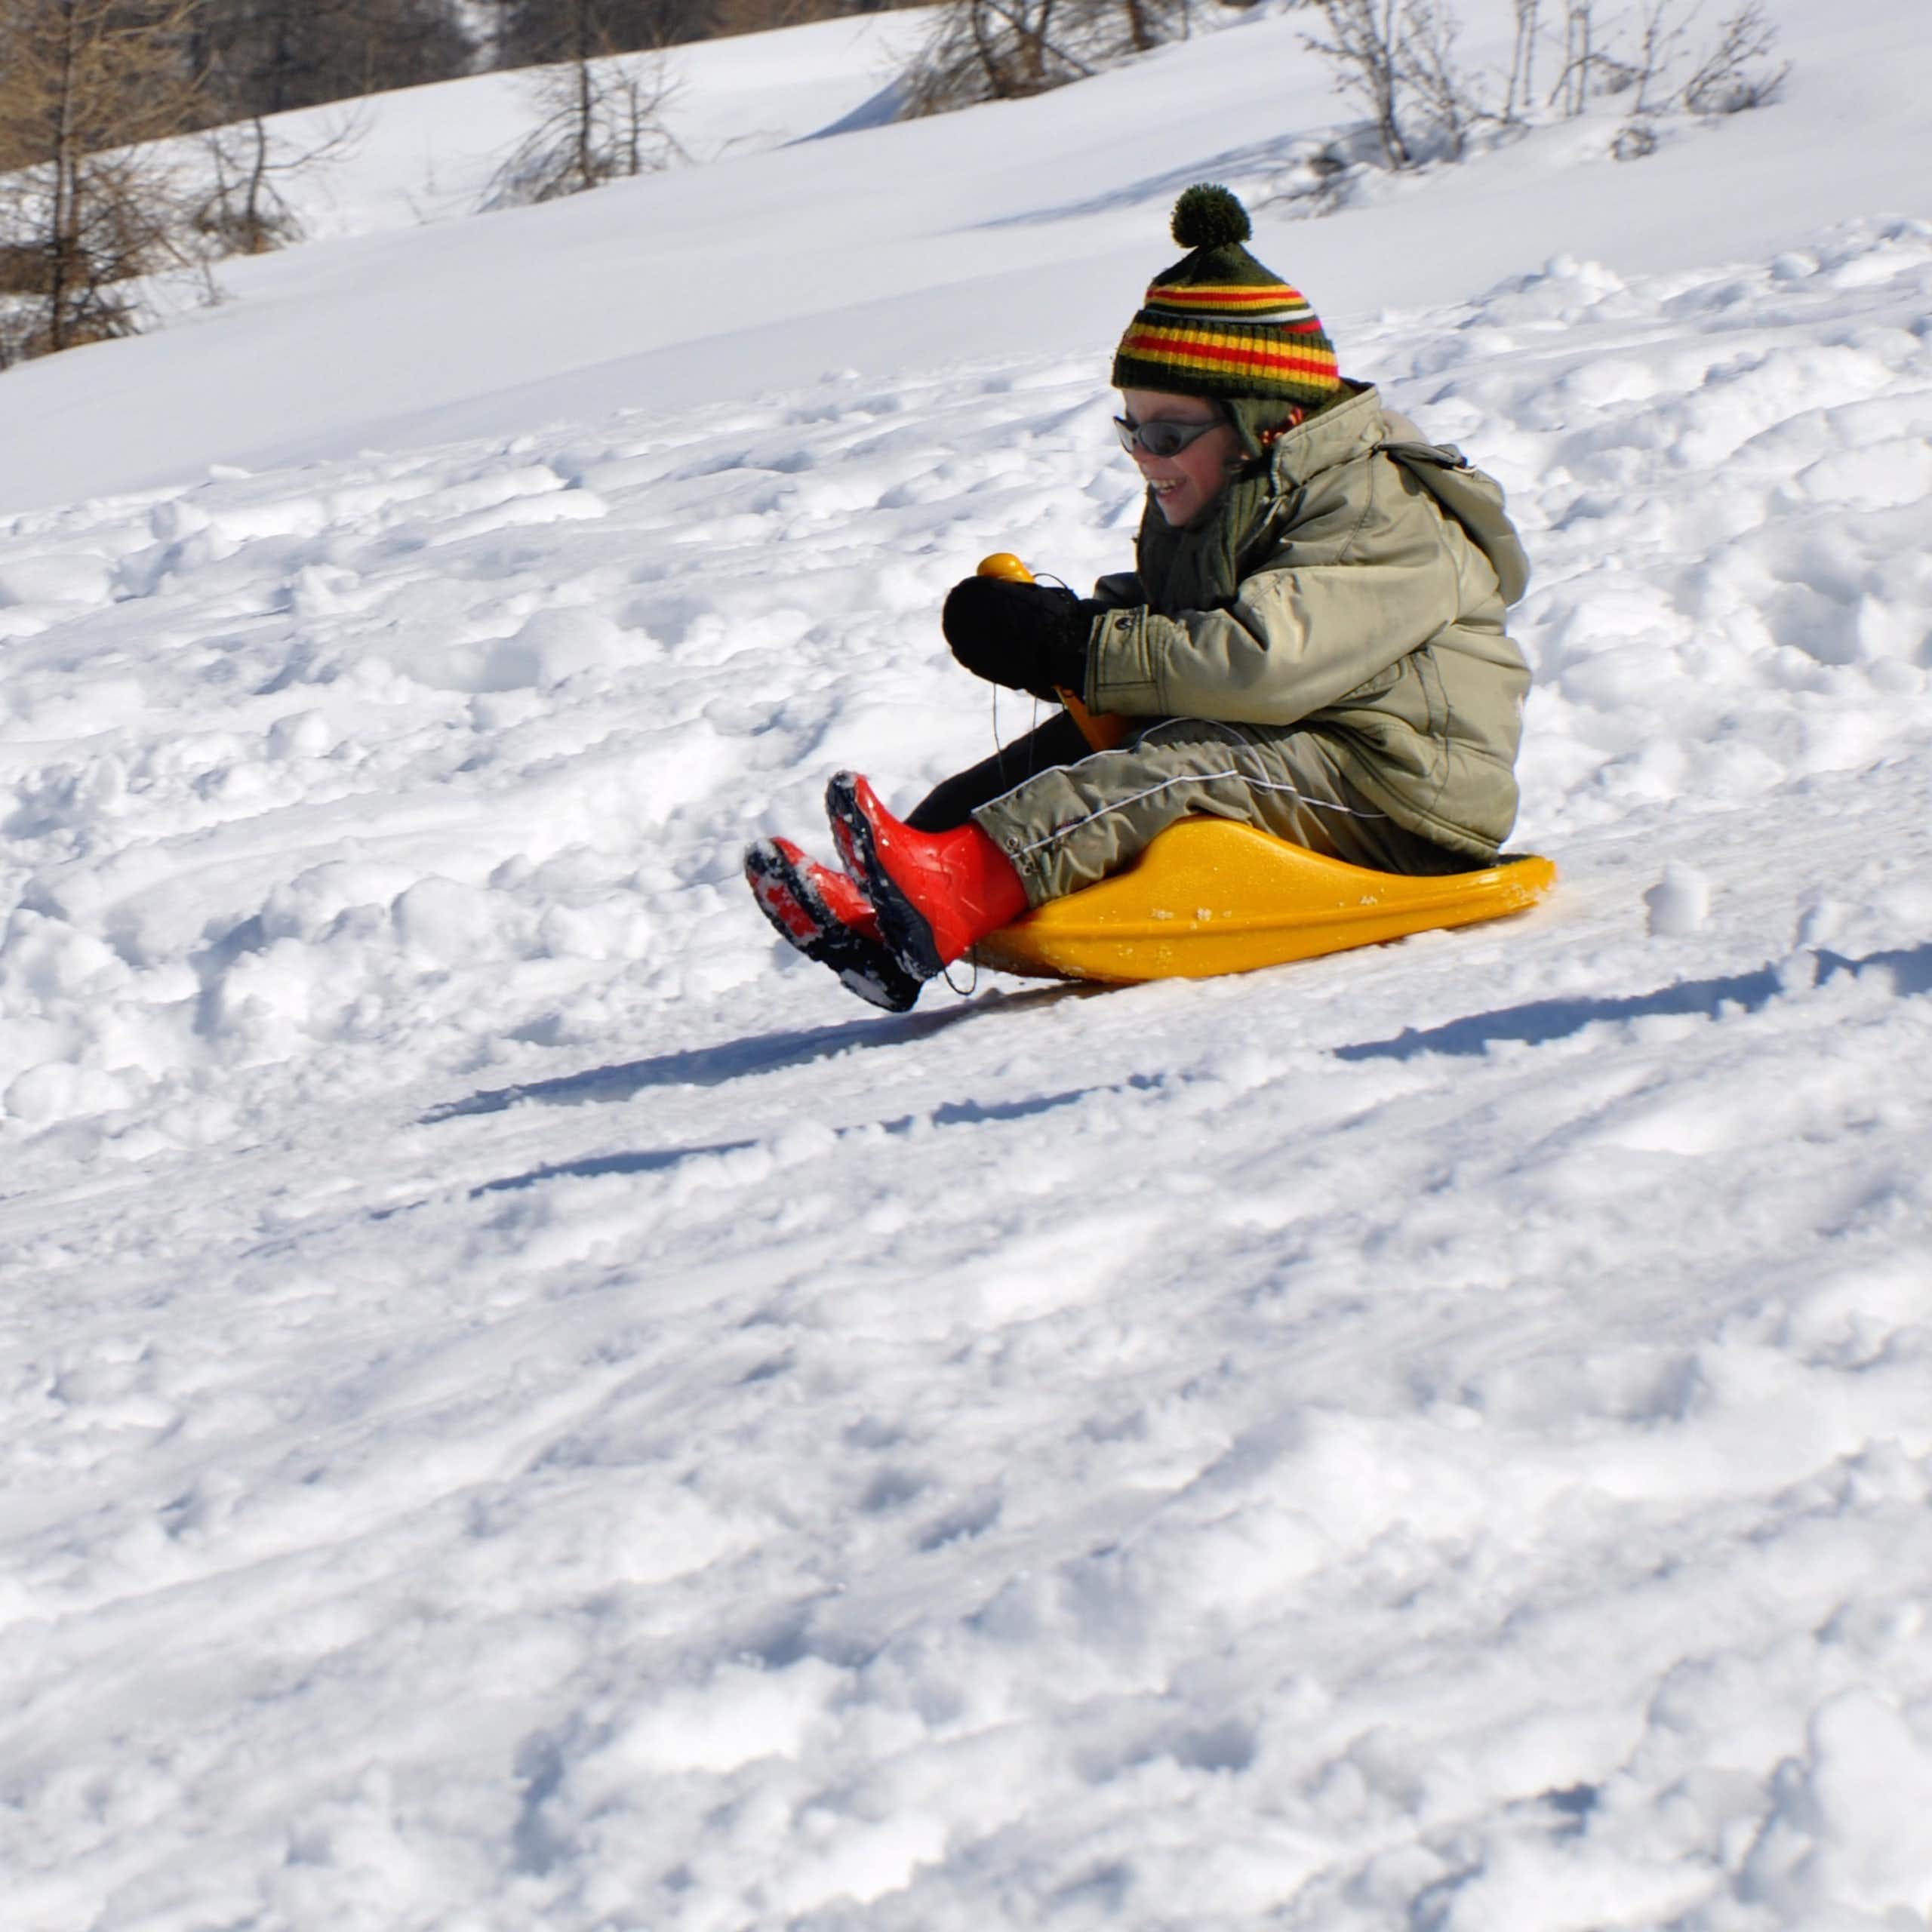 A young girl goes sledding down a snow-covered hill.